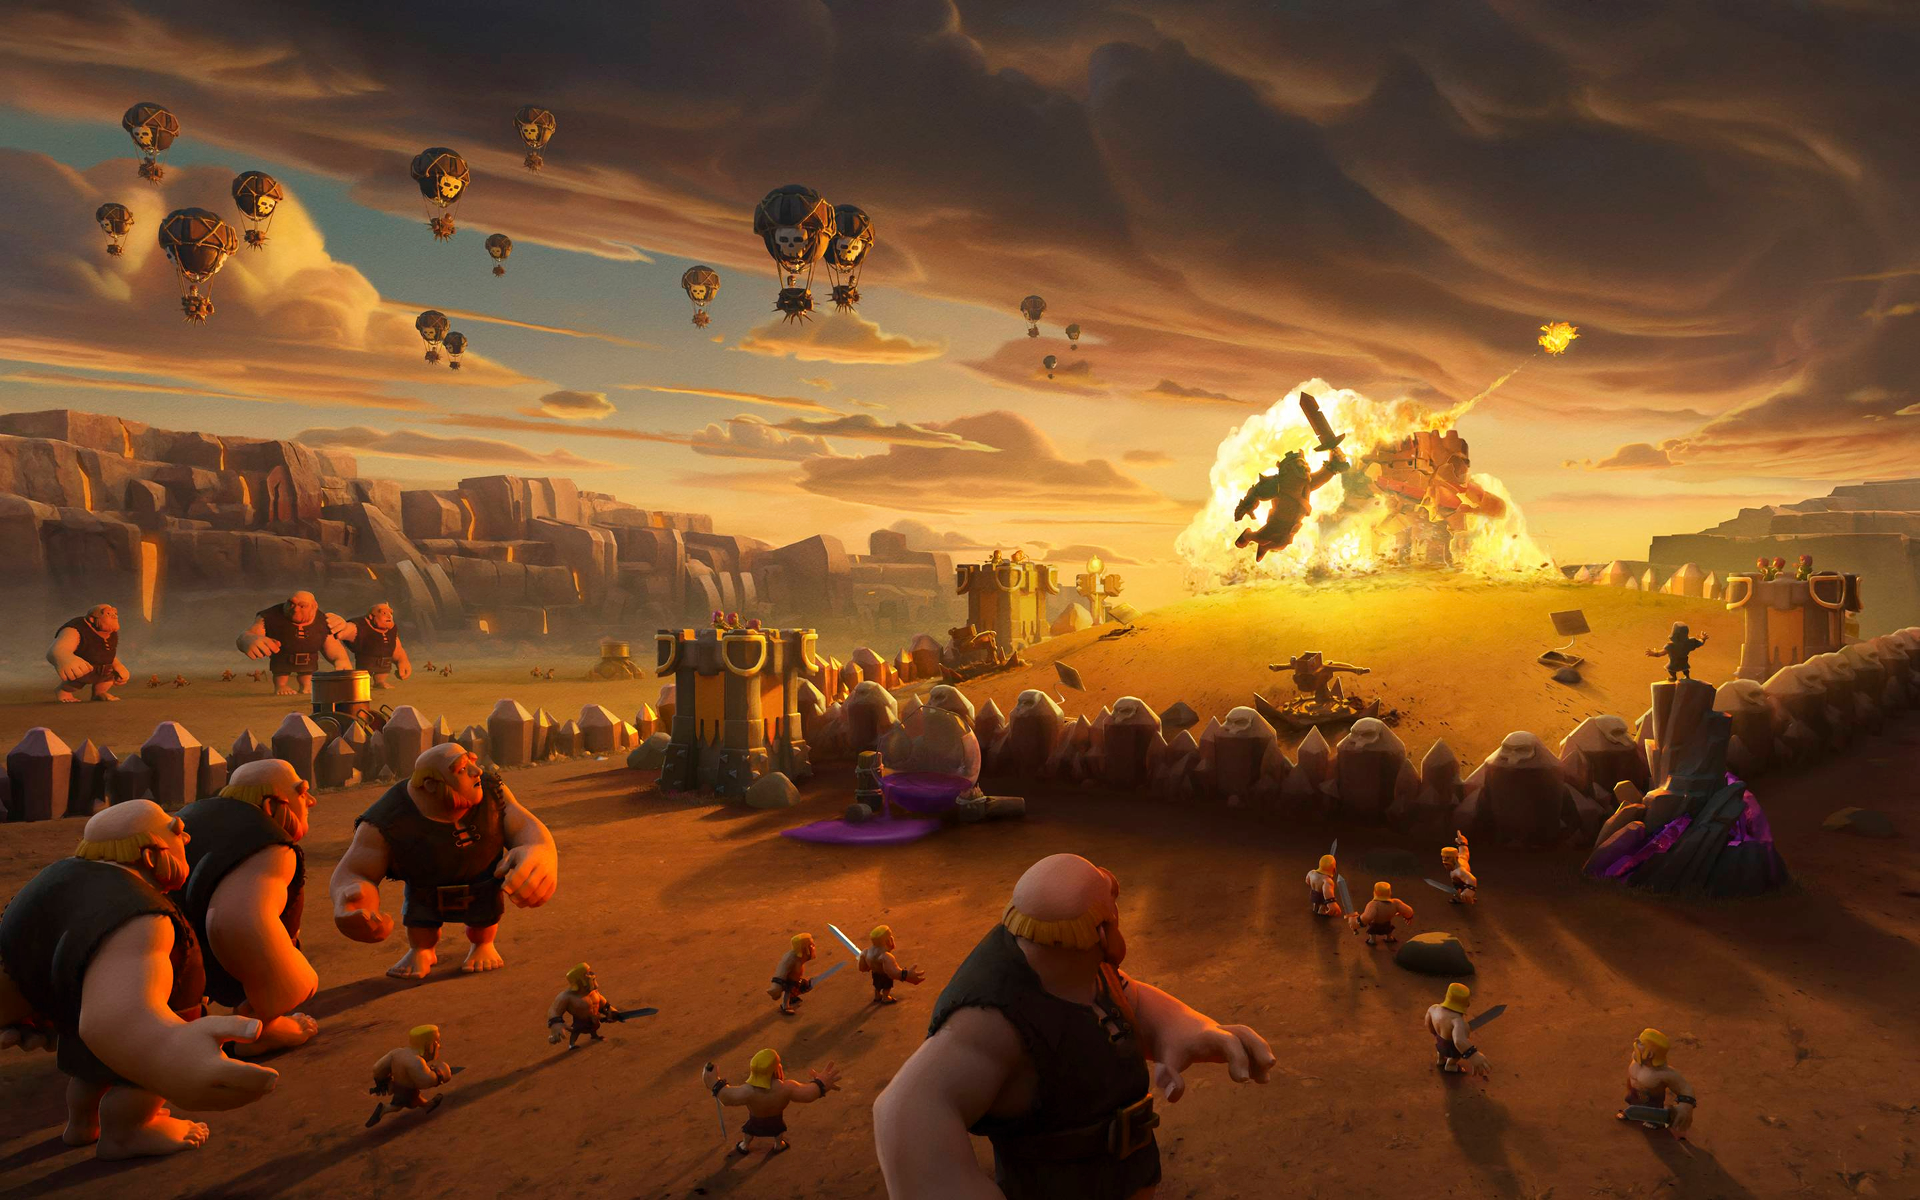 HD Clash of Clans desktop wallpaper featuring an epic battle scene with characters and airships against a dramatic sky.